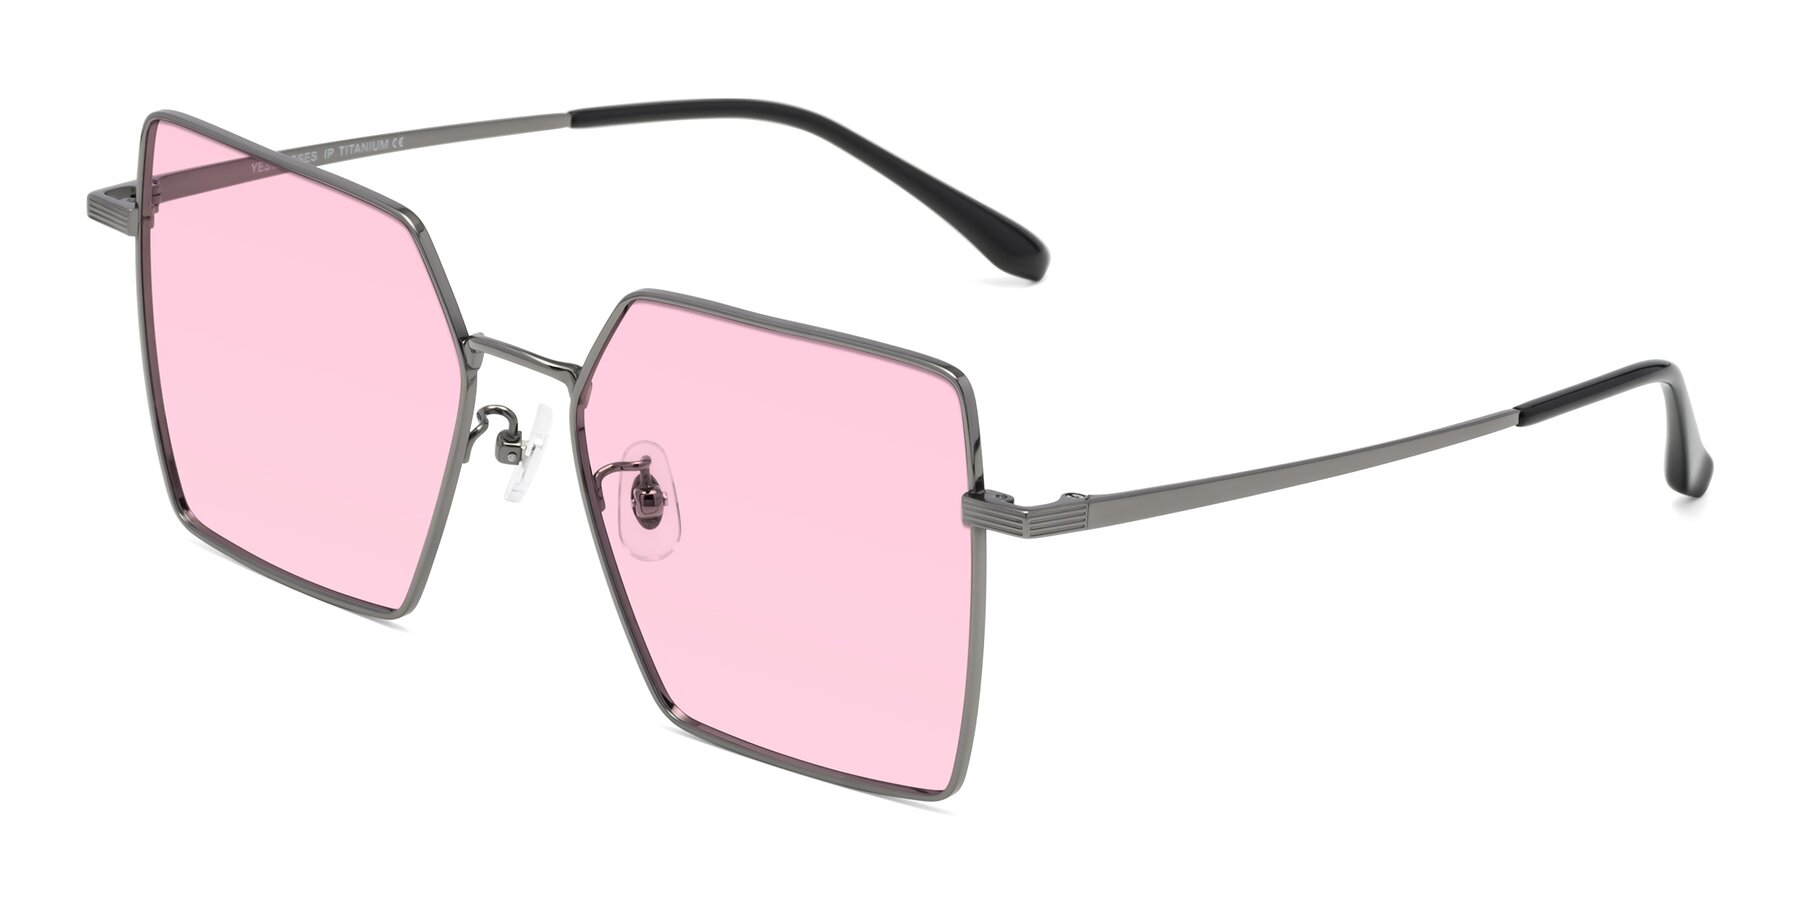 Angle of La Villa in Gunmetal with Light Pink Tinted Lenses